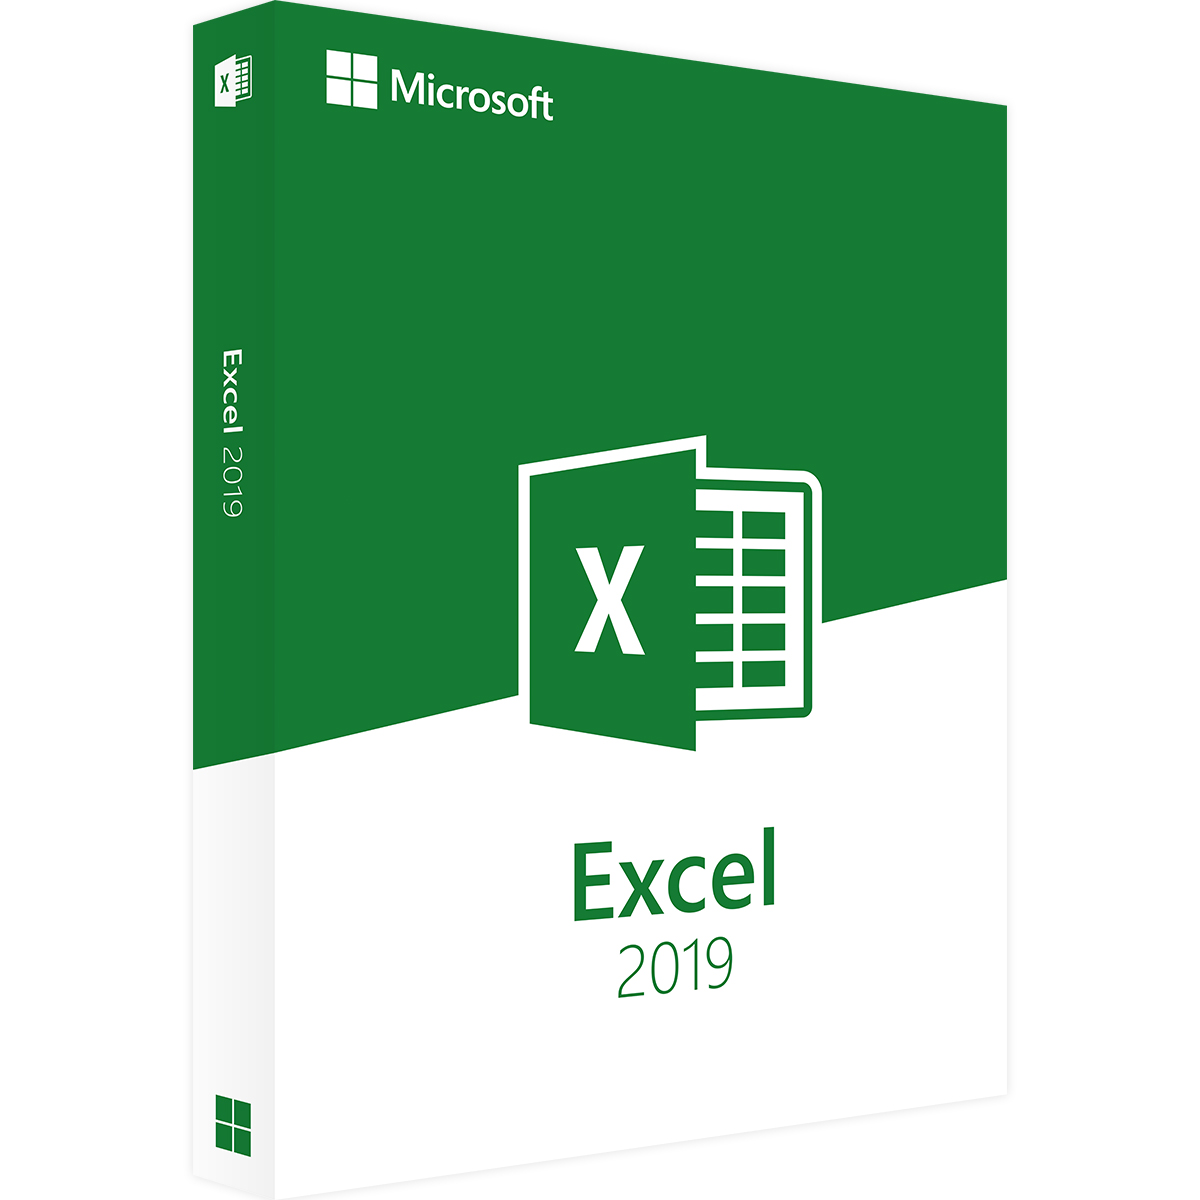 ms office 2019 excel